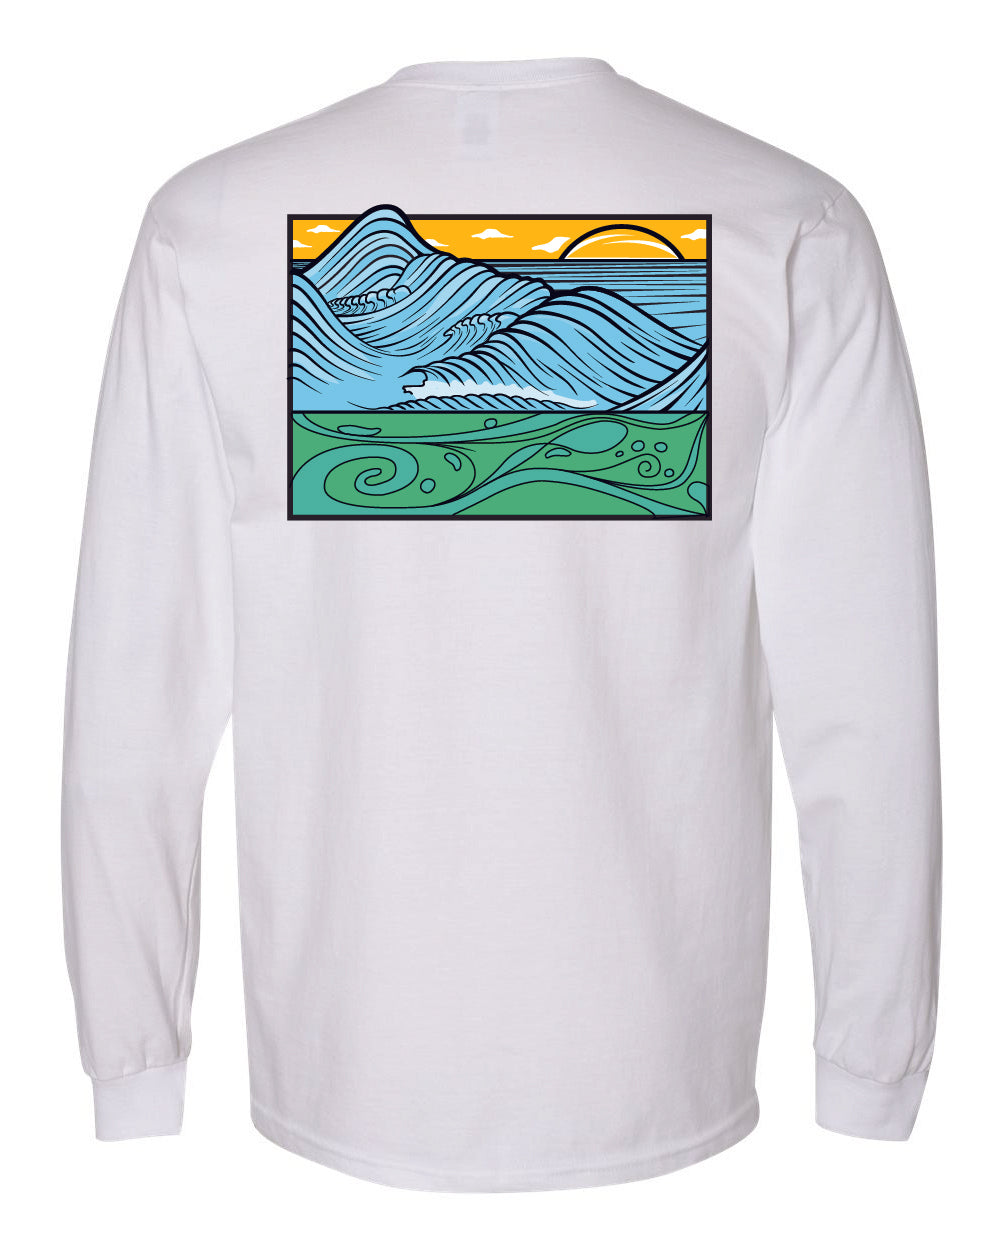 Graphic Surf Lotus - NEW "T for a Cause" - Heavy Weight -  White Long Sleeve